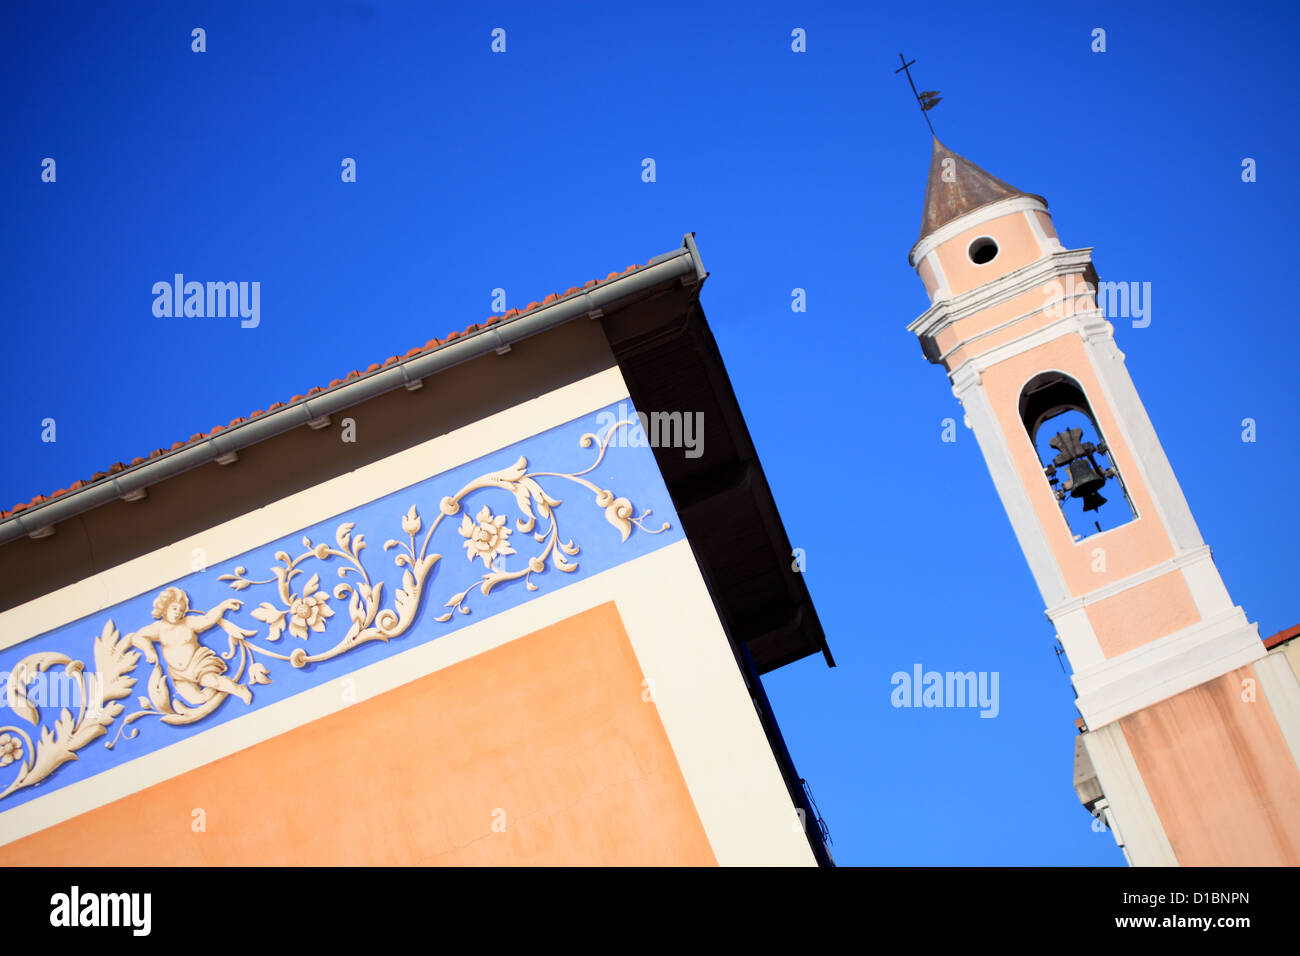 Typical architecture of the French Riviera with the painted frieze on the wall Stock Photo